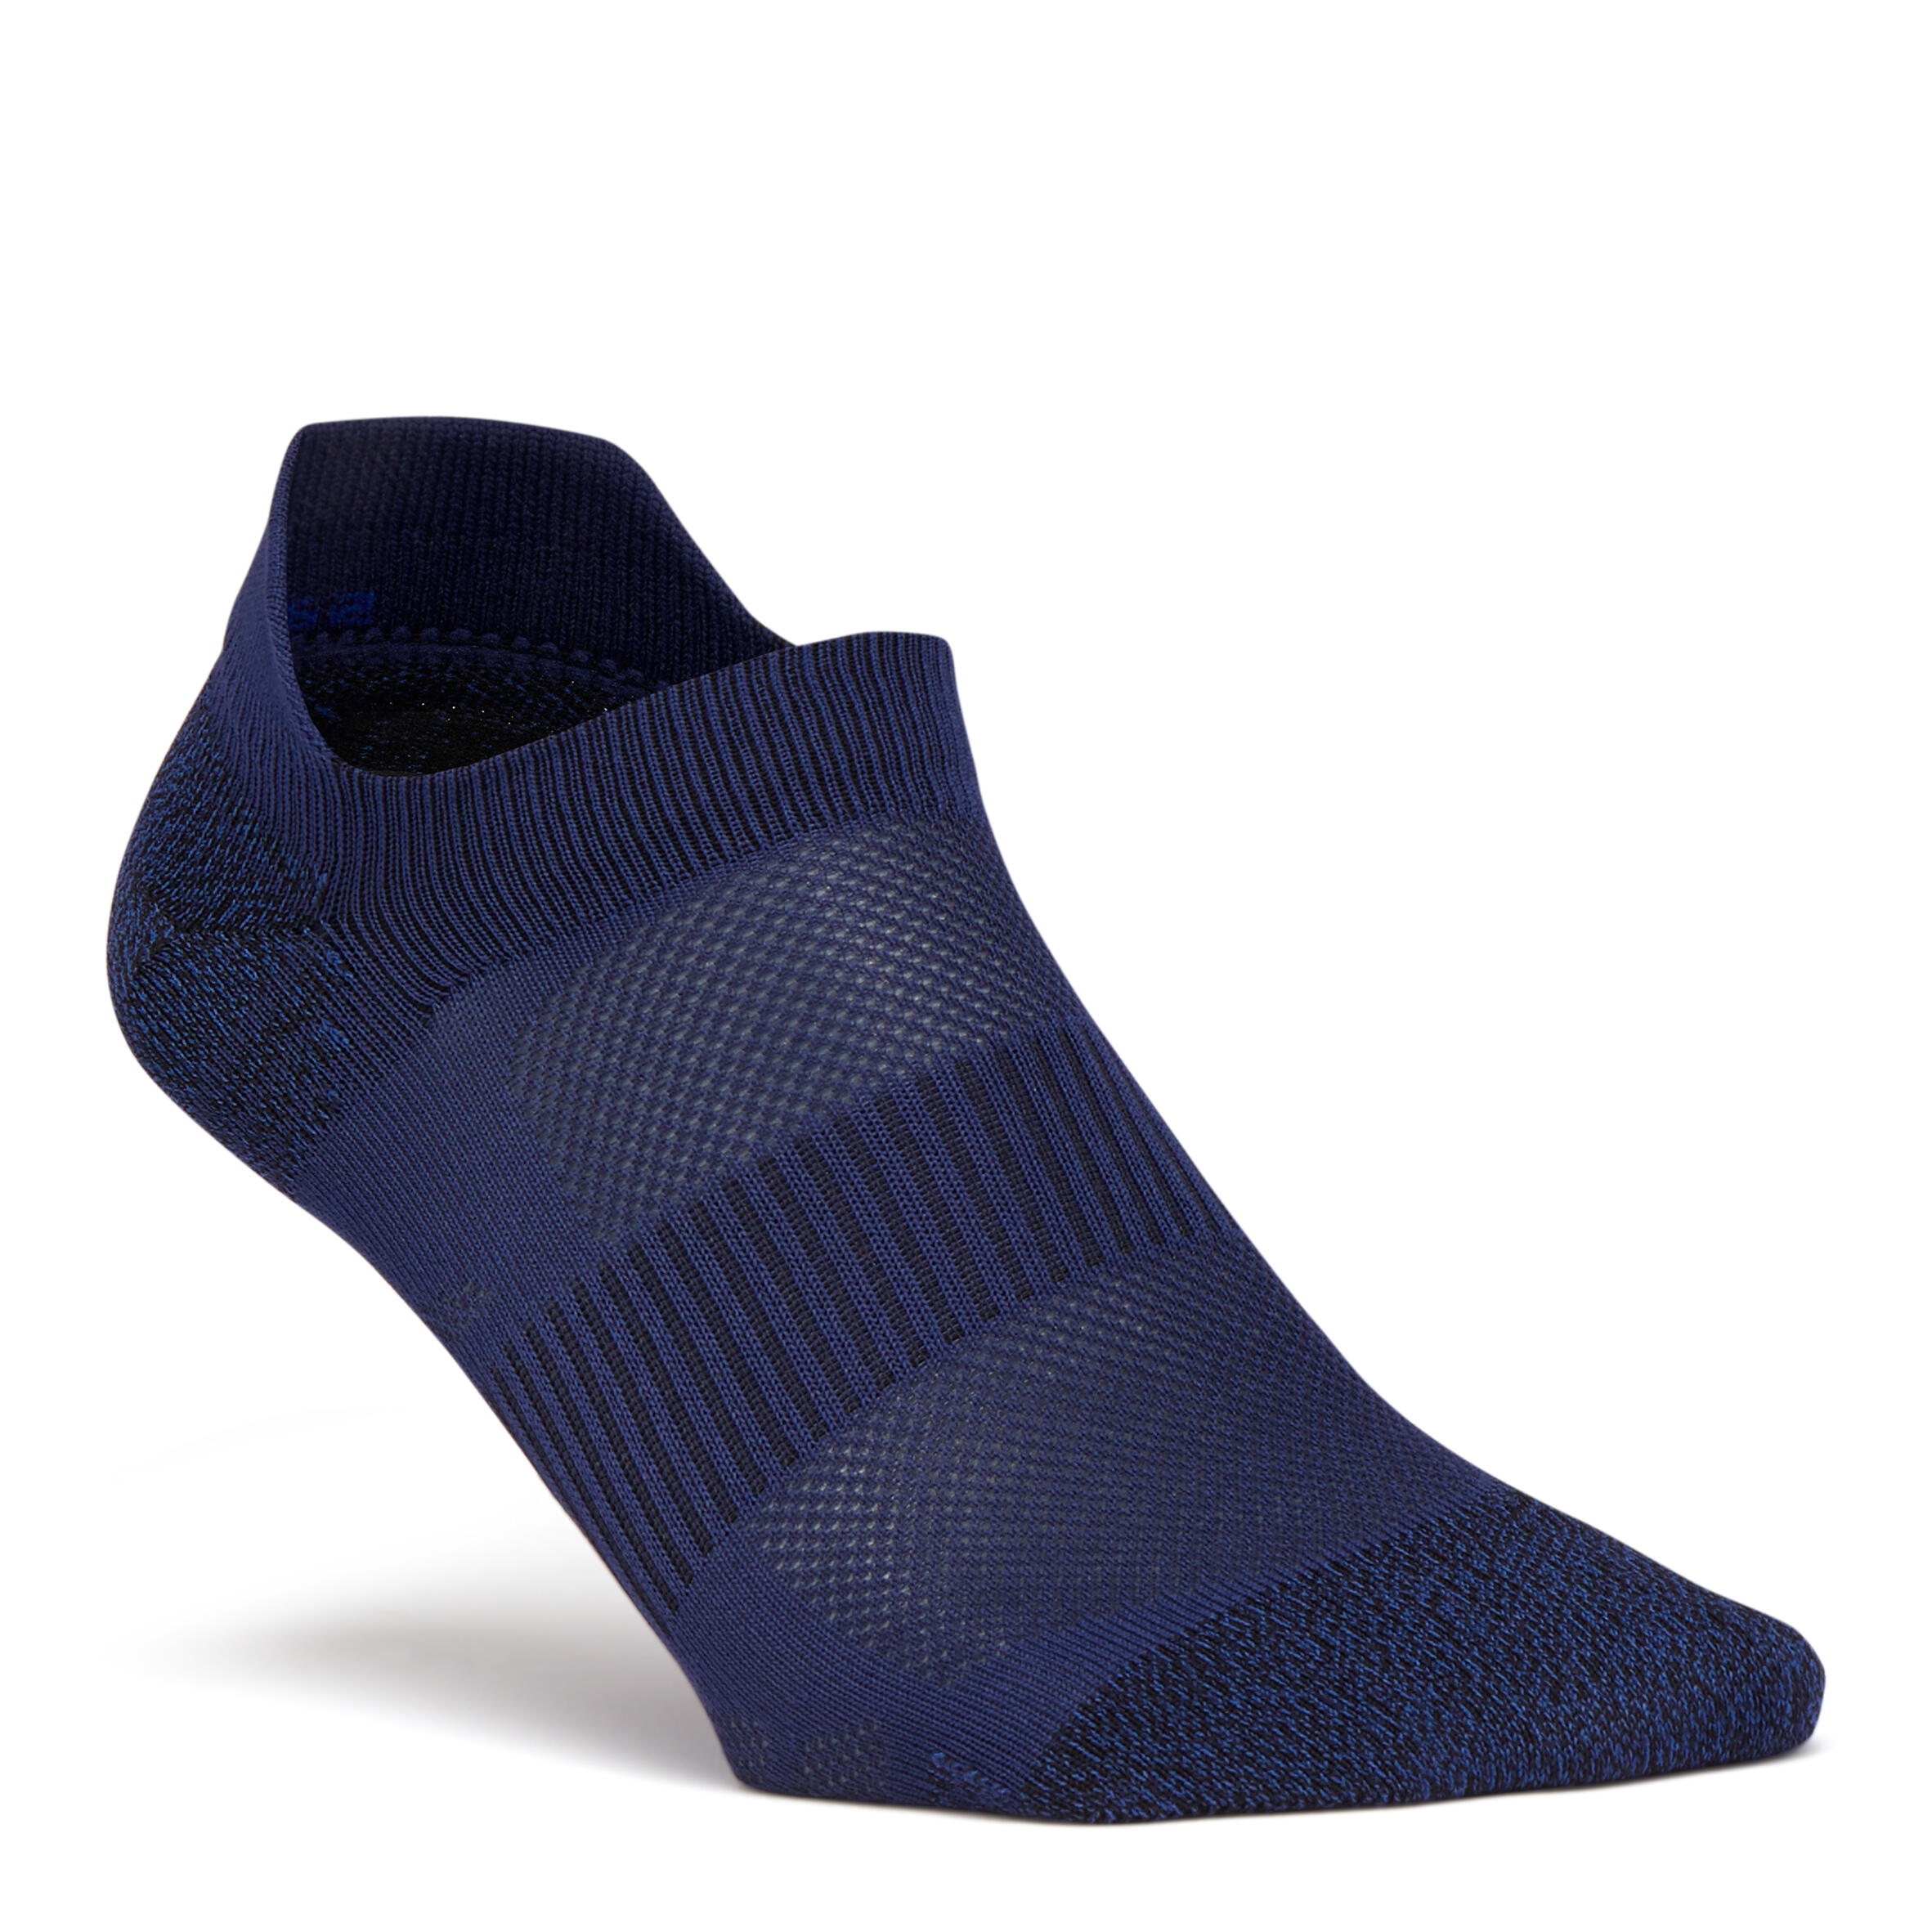 WS 500 Invisible Fresh Active and Nordinc Walking Socks - Blue/White/Blue 2/6